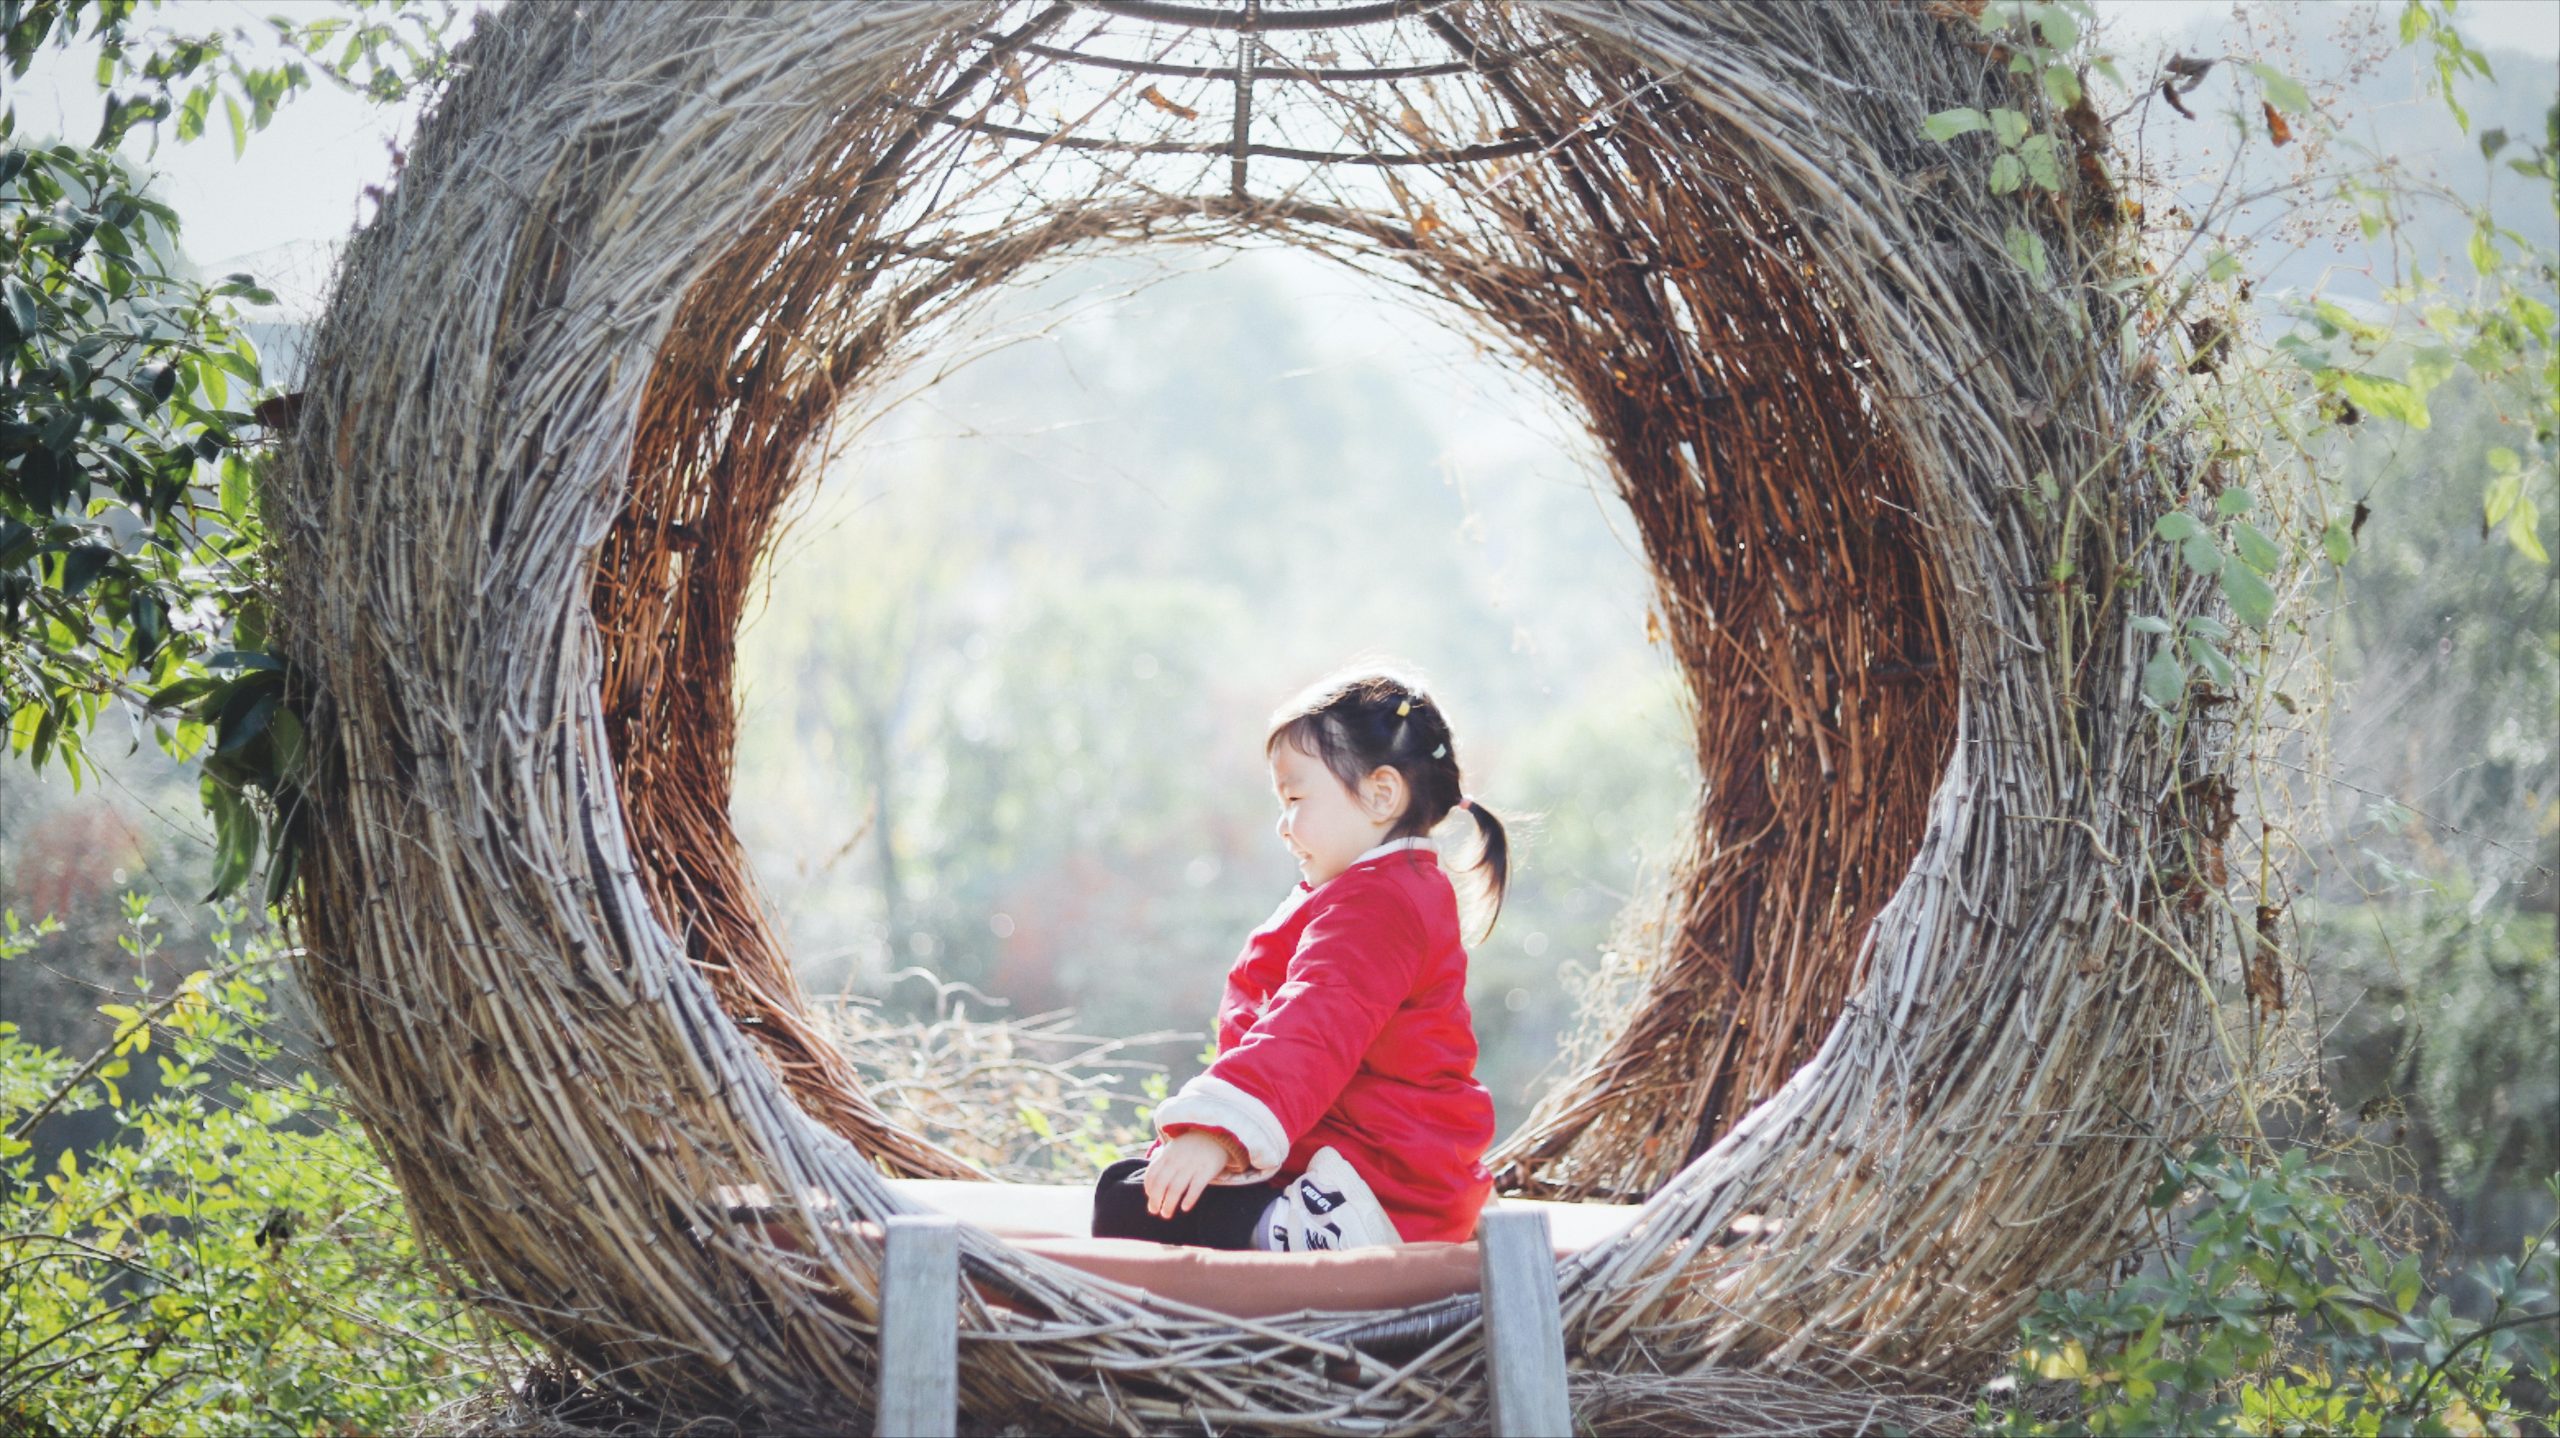 A child wearing a red dress sitting on a swing.